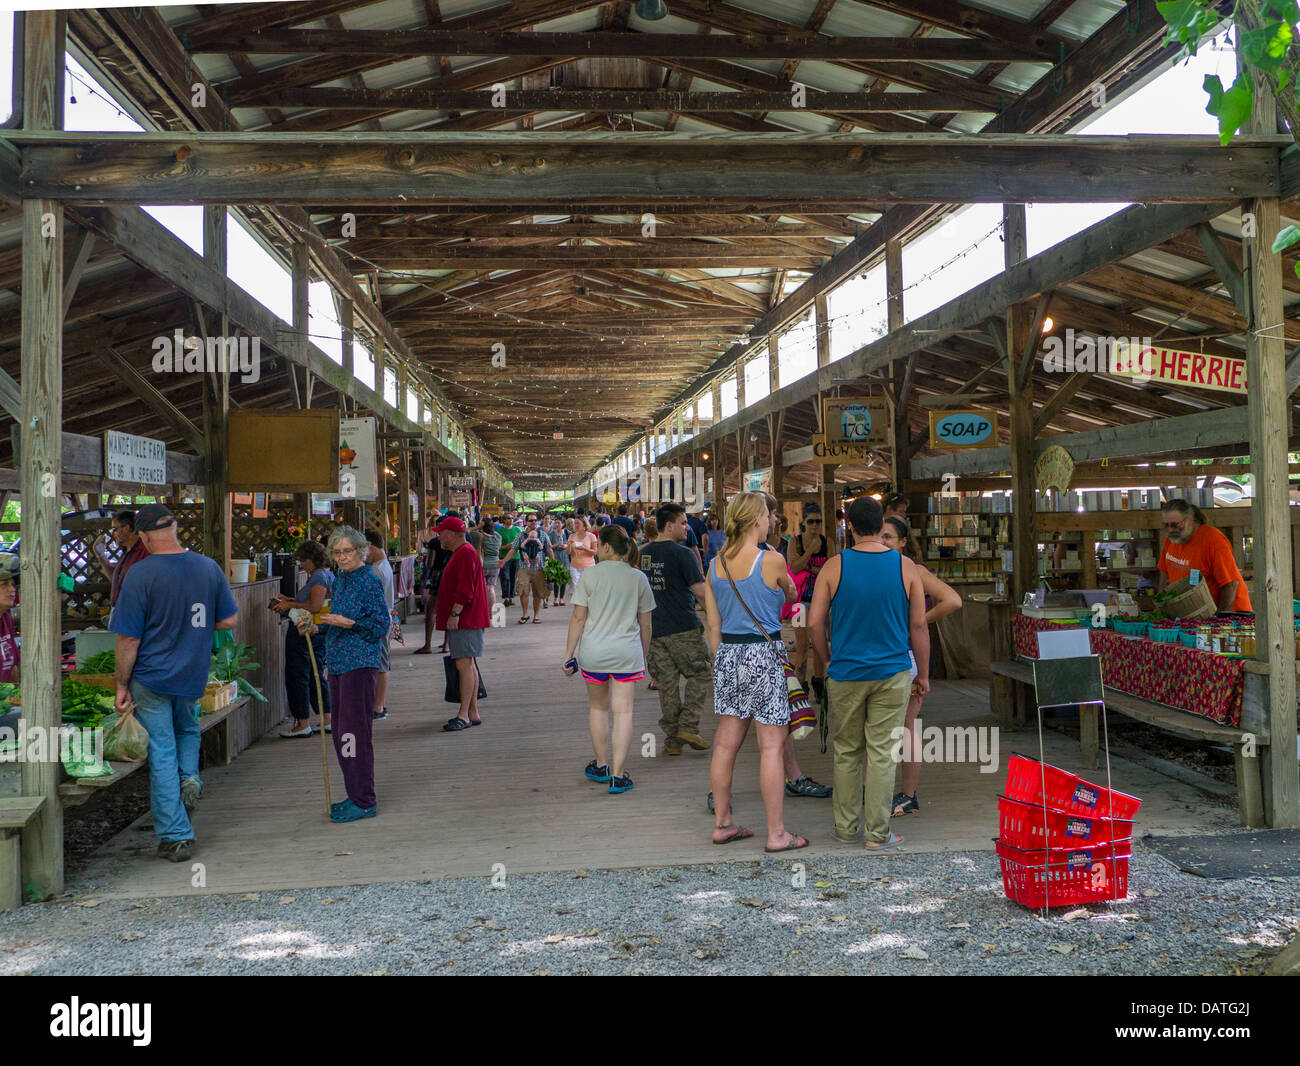 Farmers Market at Steamboat Landing in the Finger lakes region in Ithaca New York Stock Photo